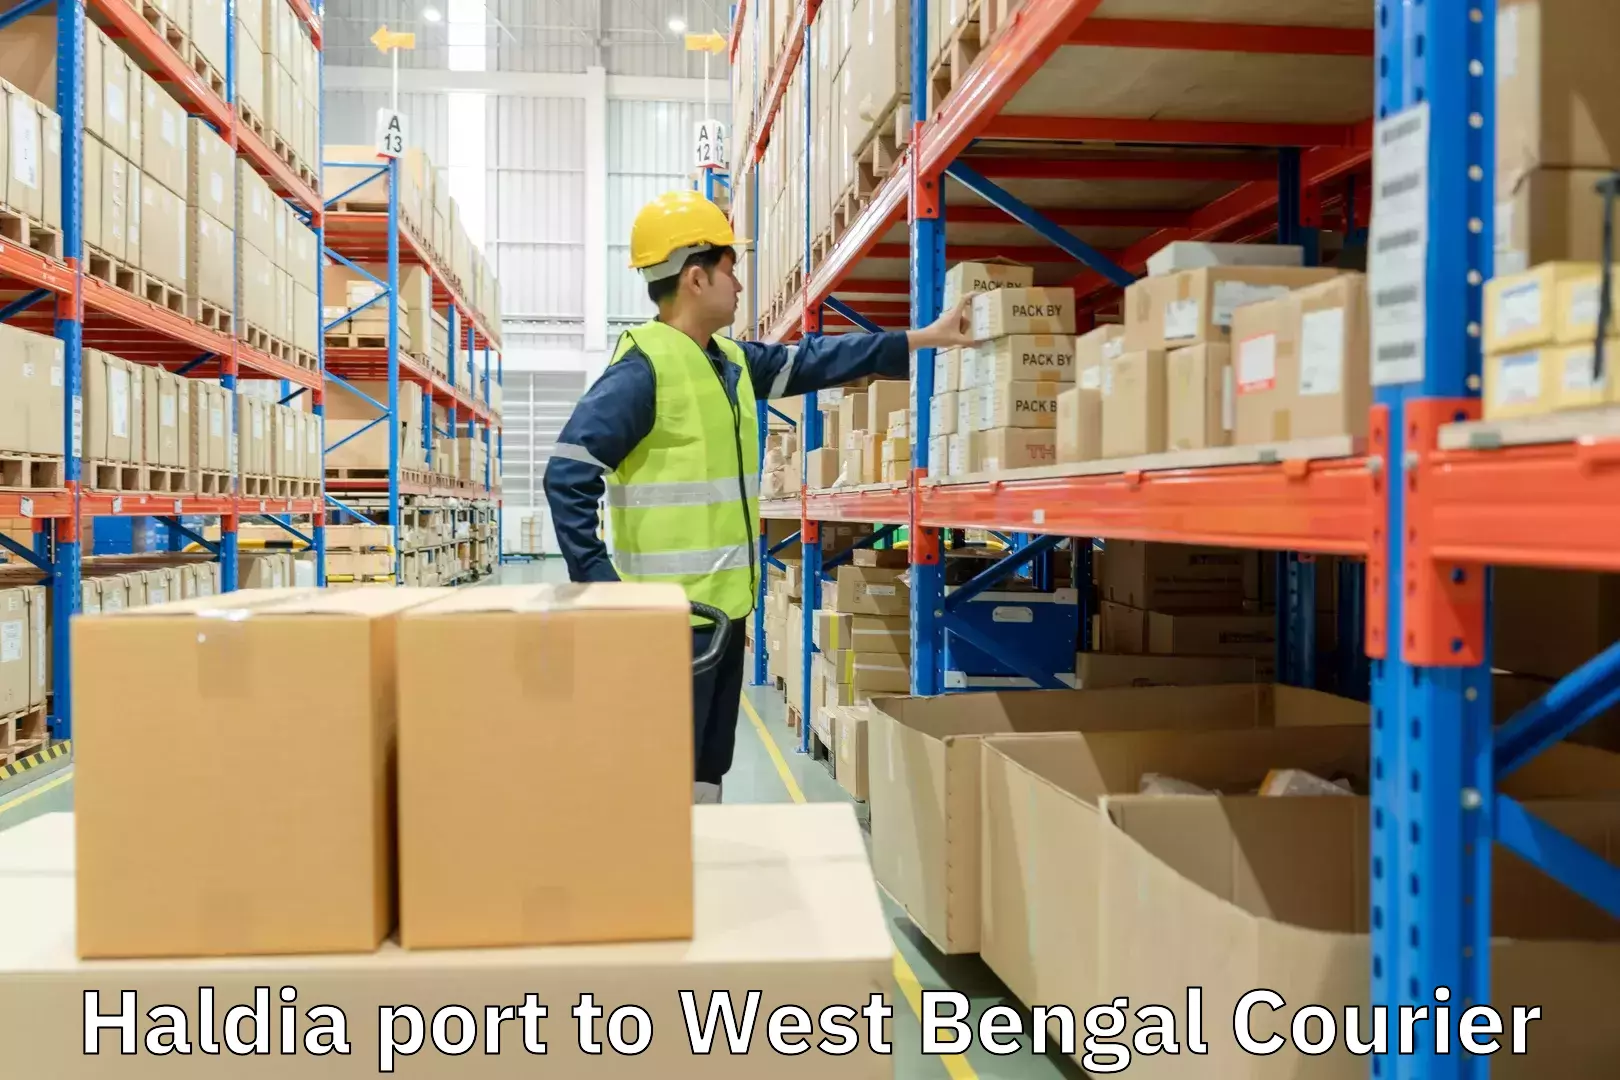 High-quality delivery services Haldia port to Chhatna